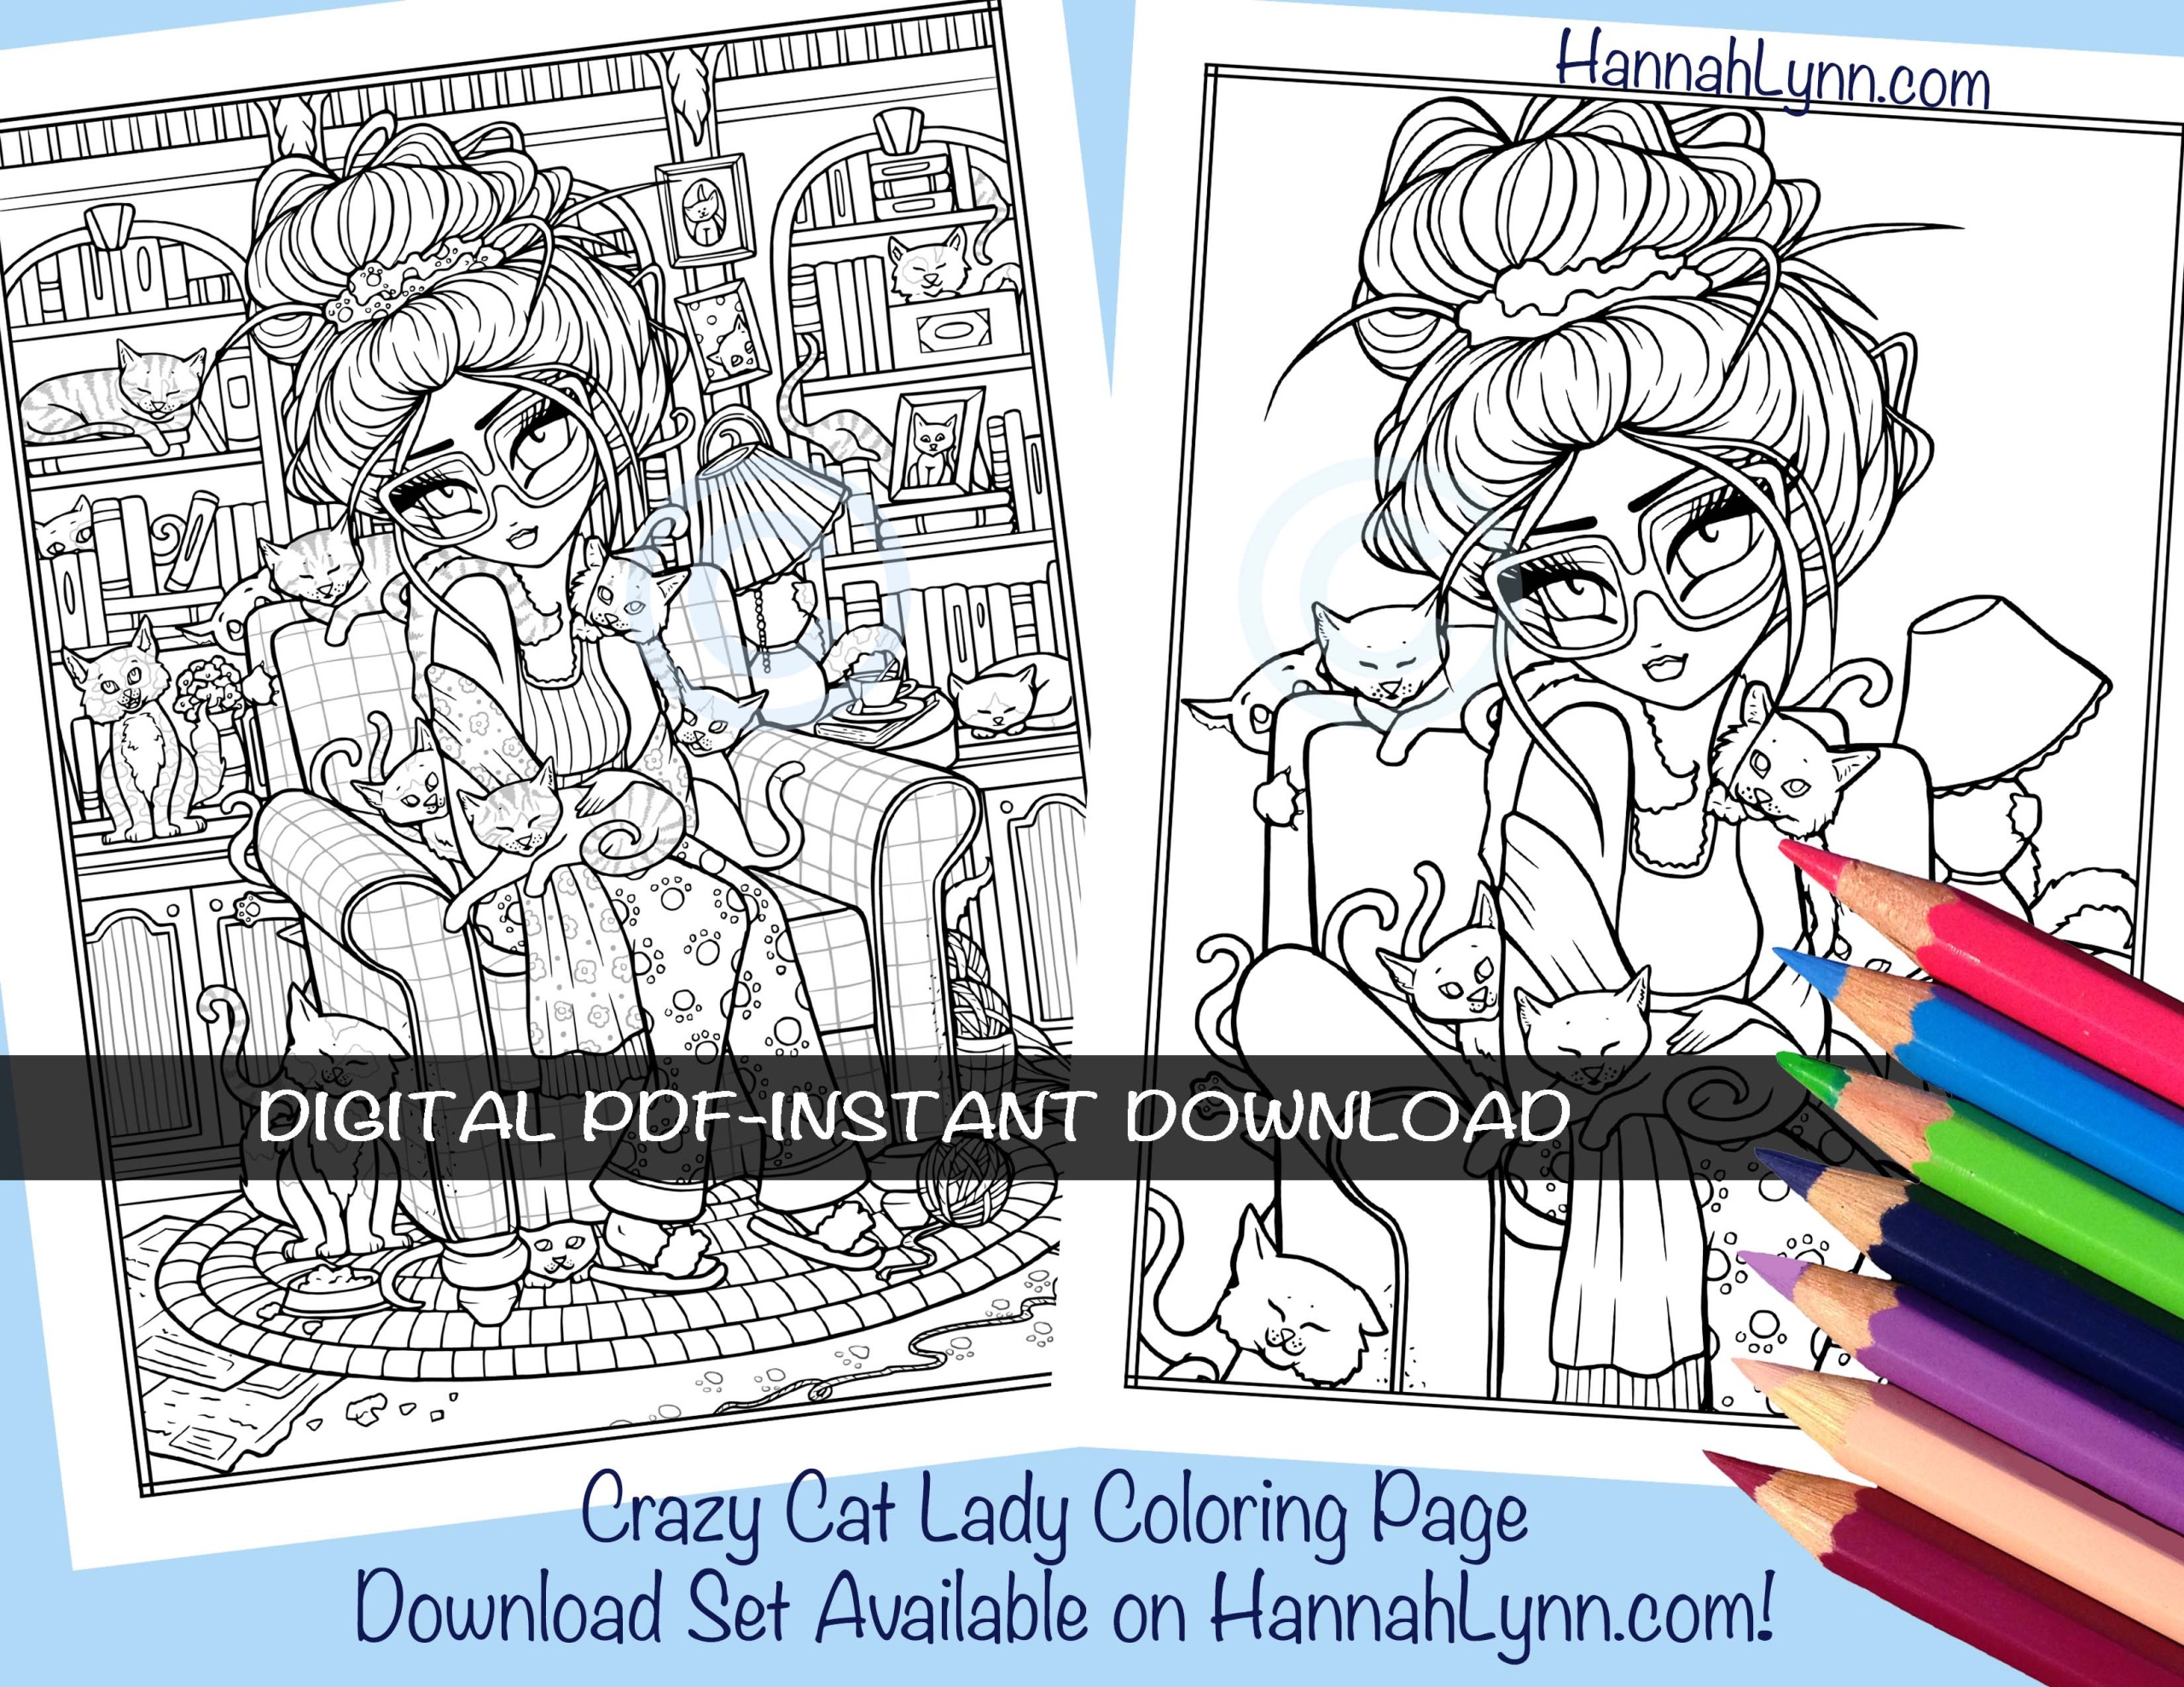 Crazy Cat Lady Coloring Page Download Set